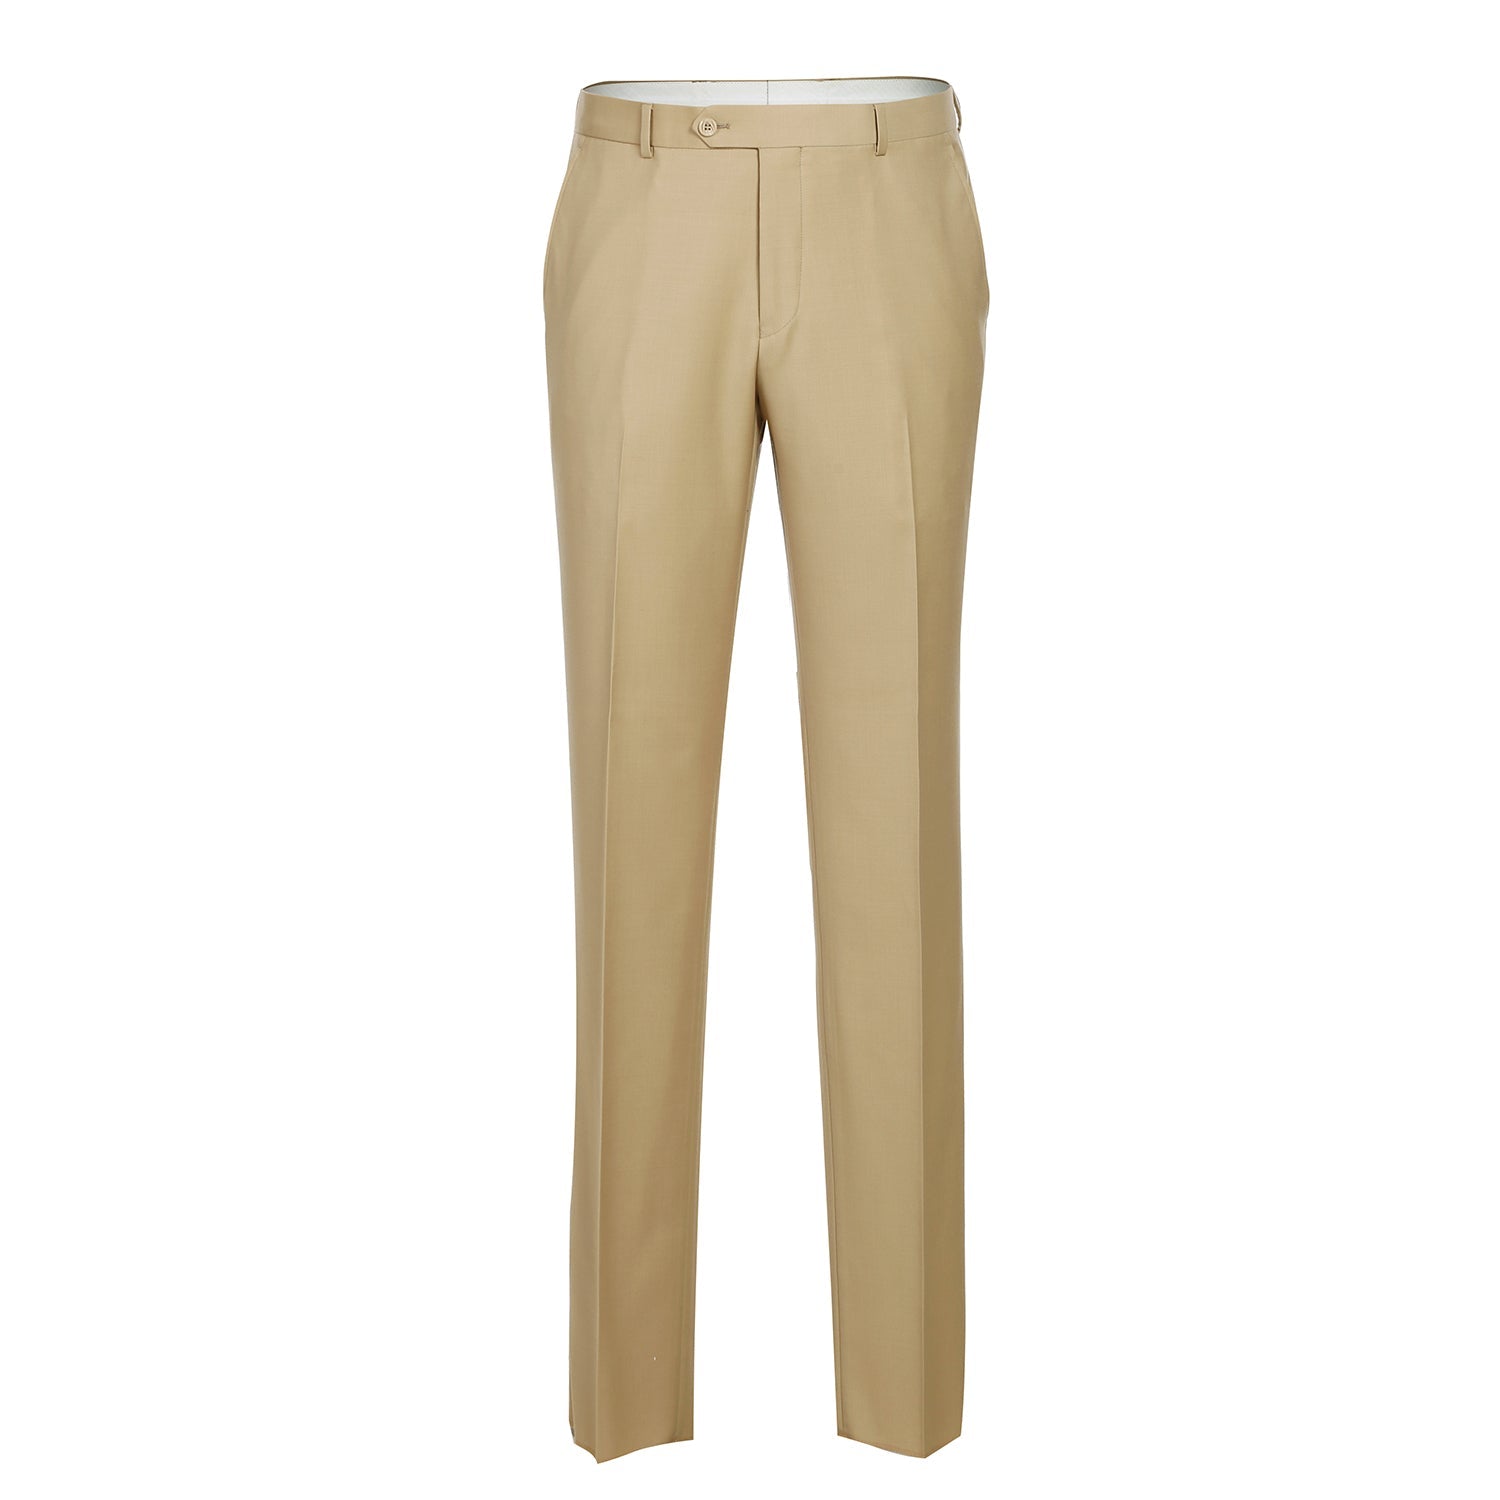 Super 140s Wool 2-Button SLIM FIT Suit in Tan (Short, Regular, and Long Available) by Renoir